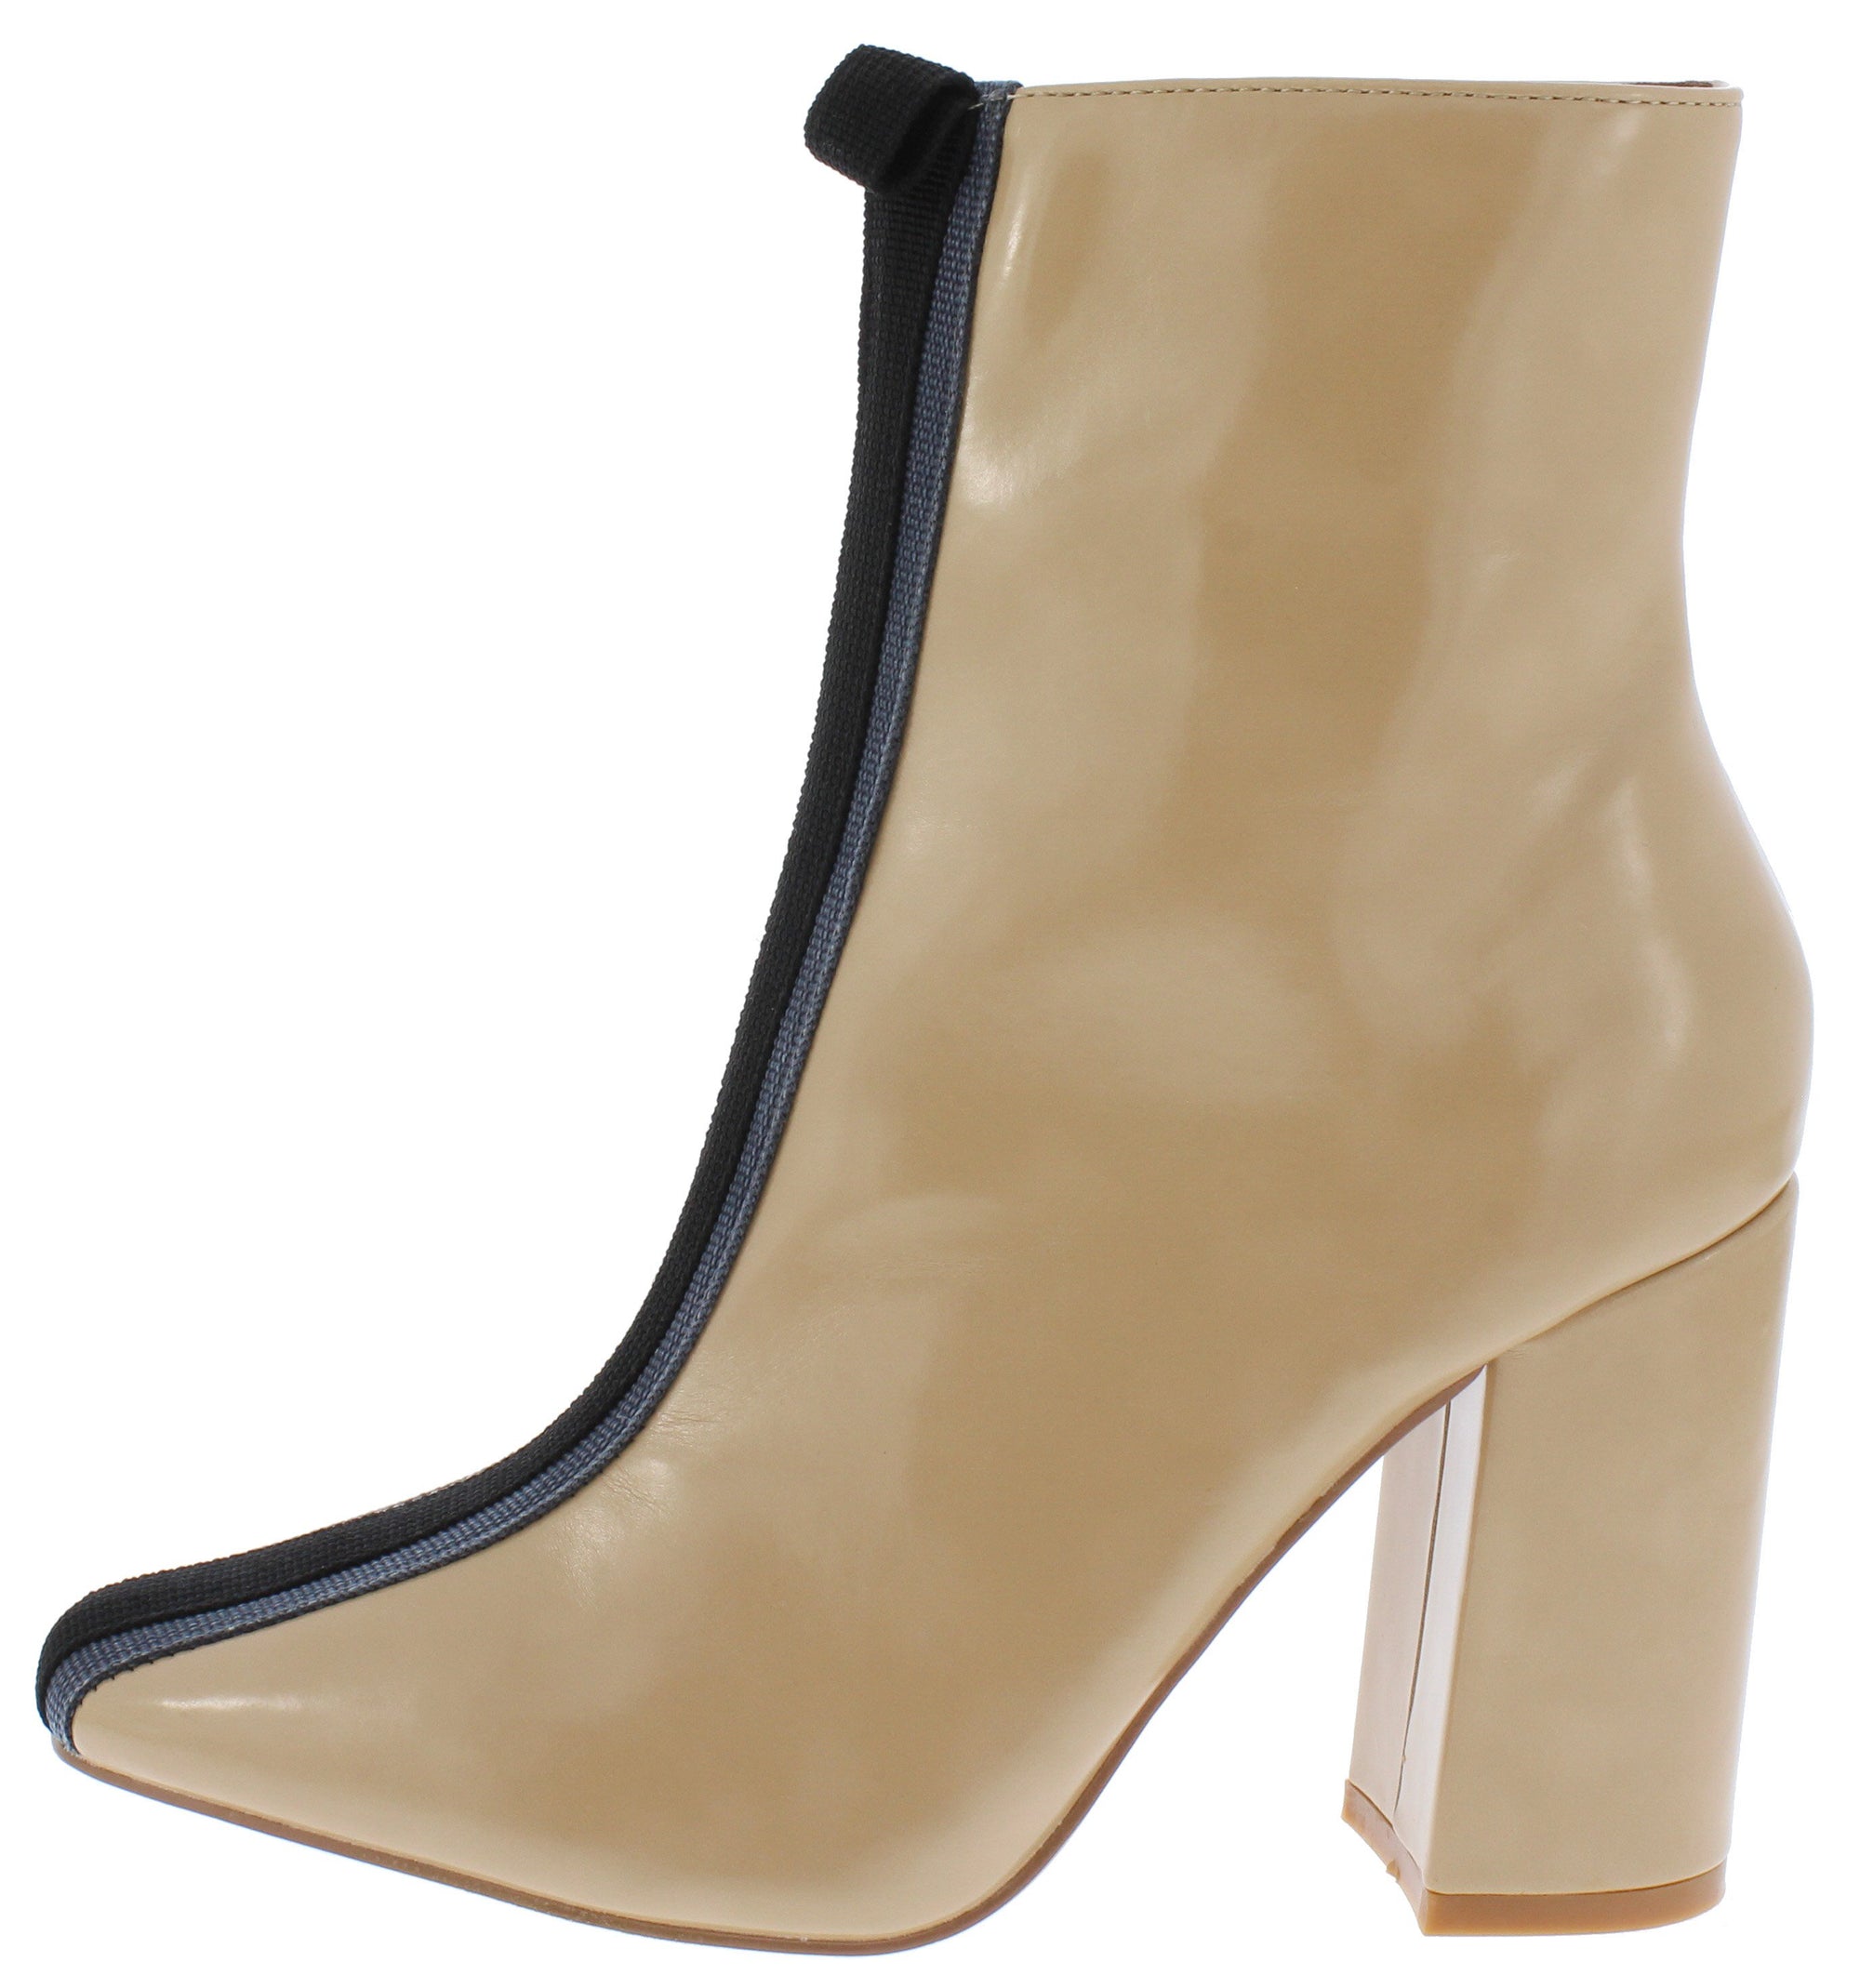 nude patent leather boots